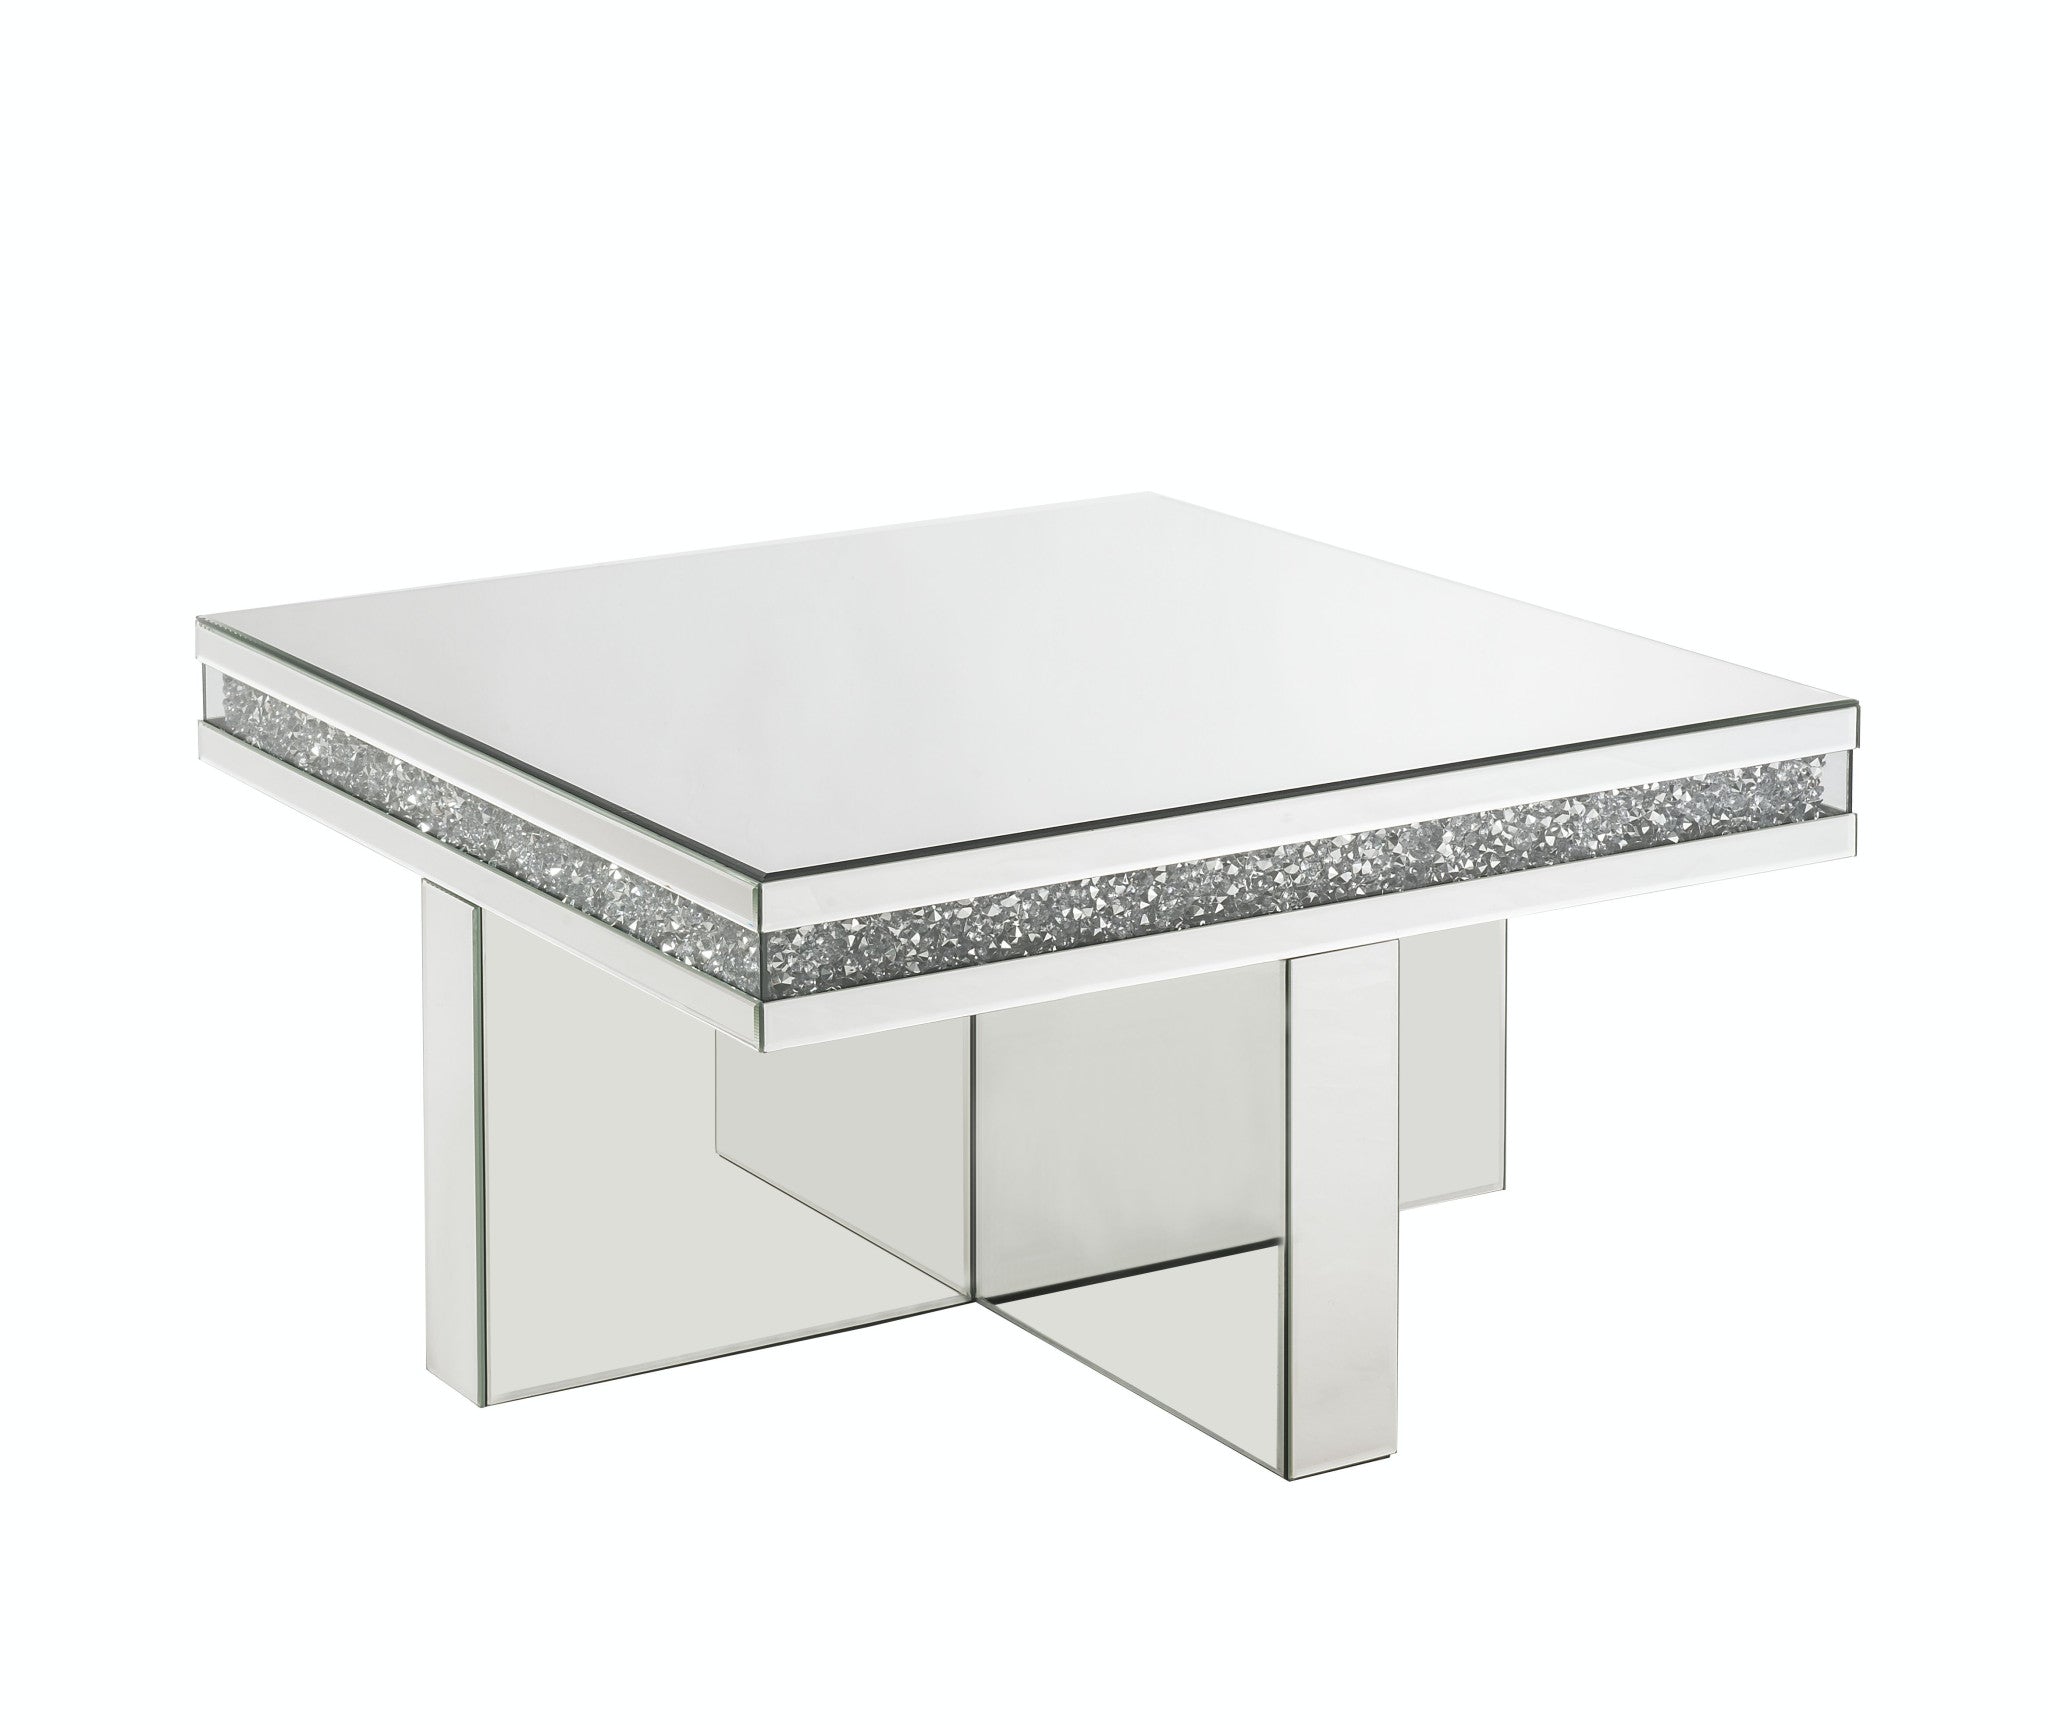 32" Silver Glass Mirrored Coffee Table